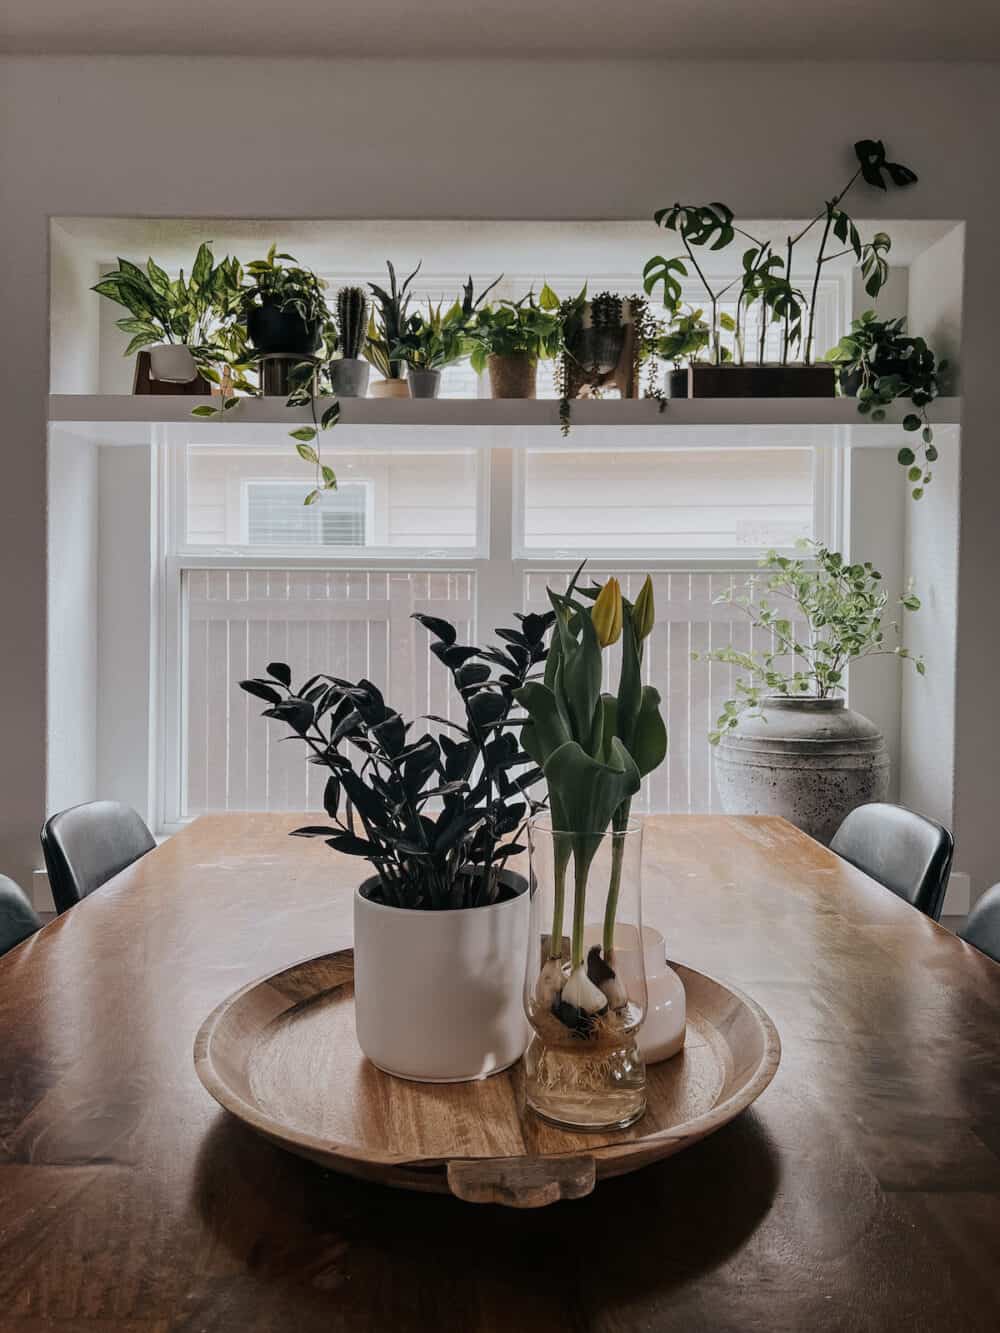 A dining table with plants on it, with a plant shelf in the background